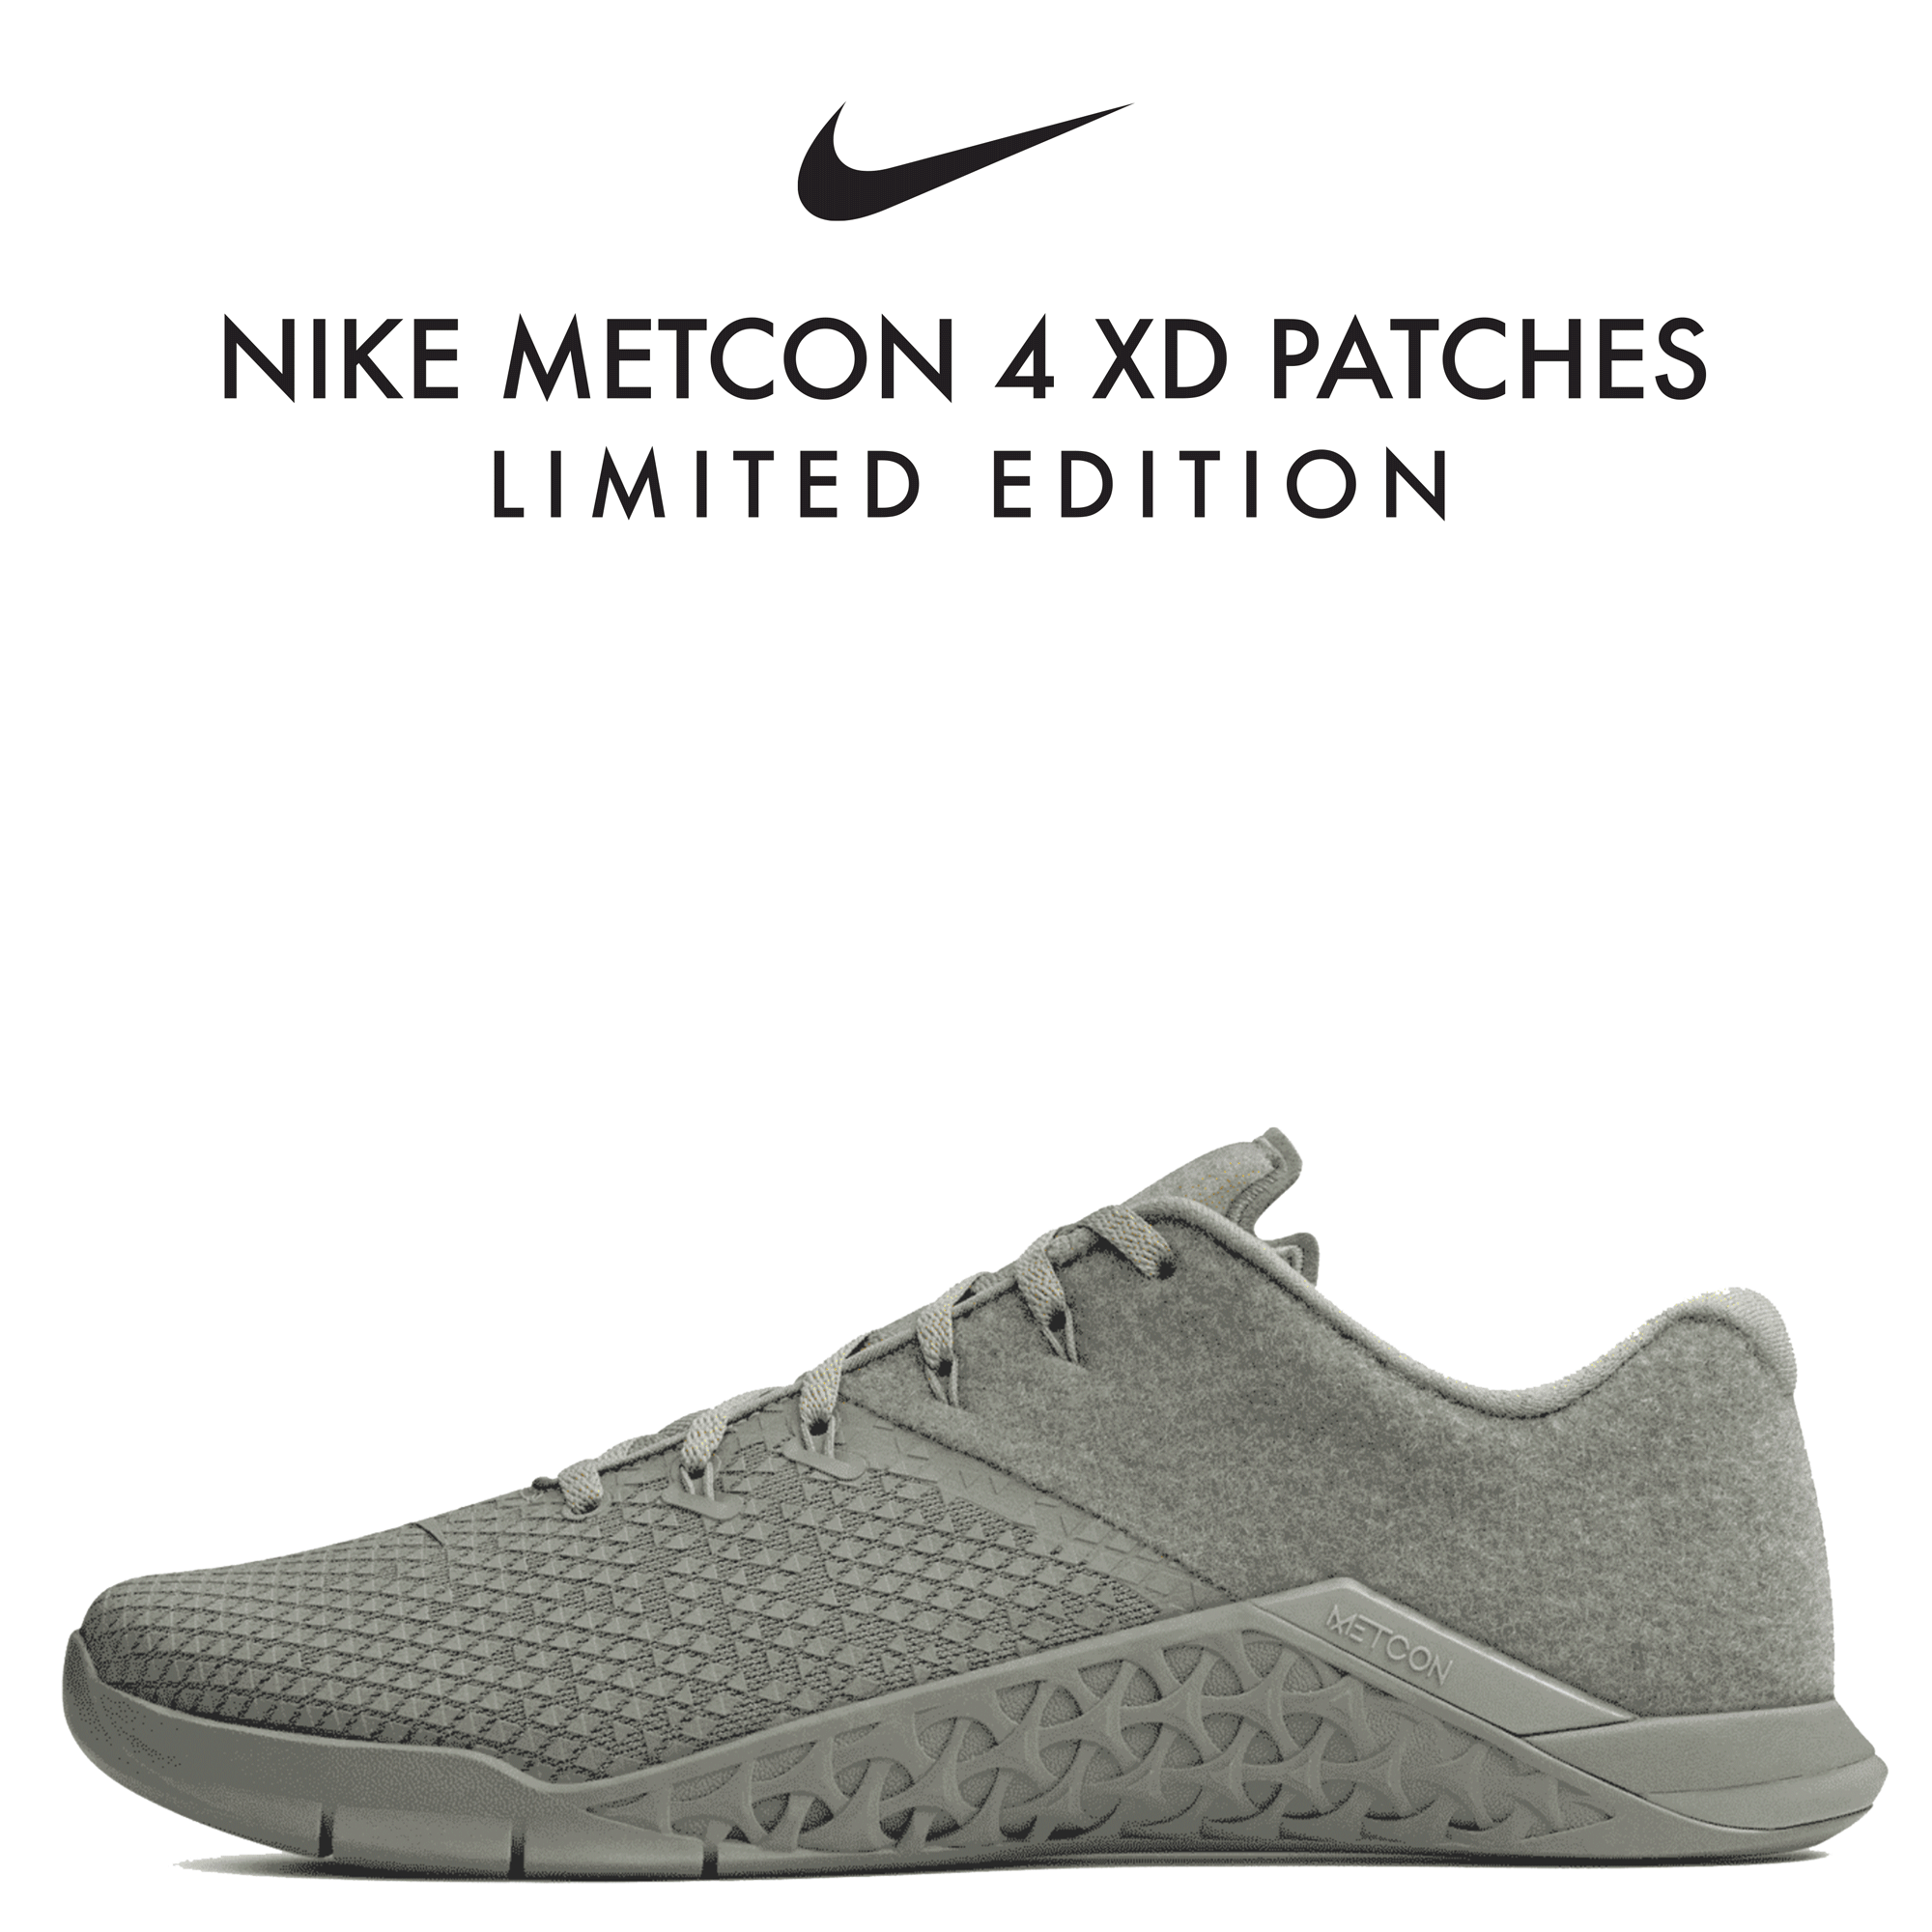 metcon 4 limited edition